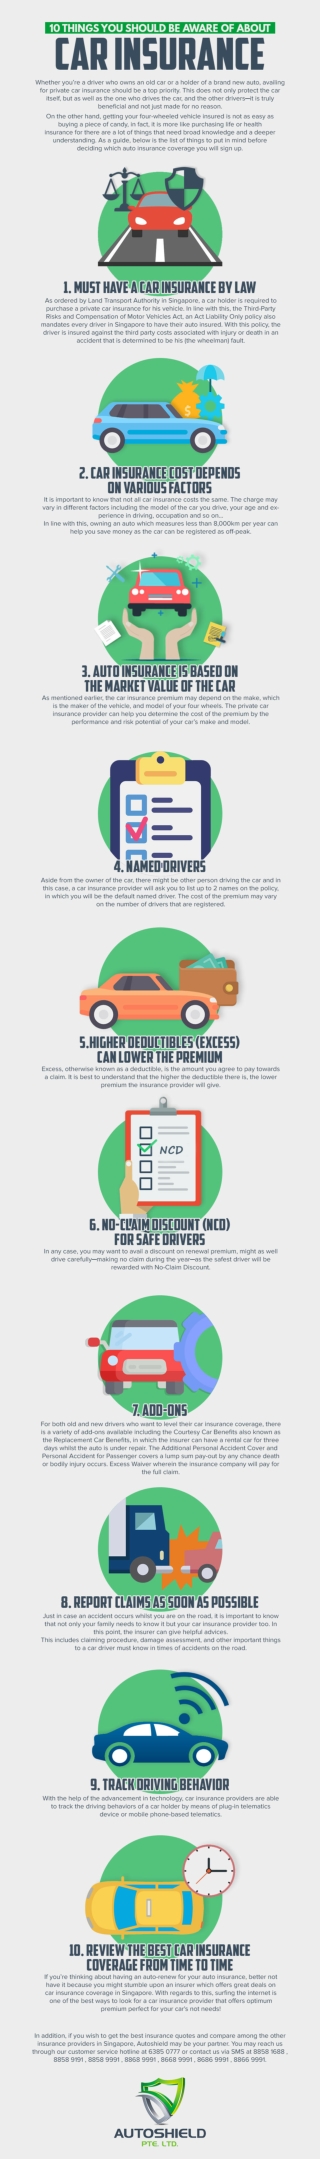 10 things you should be aware of about car insurance